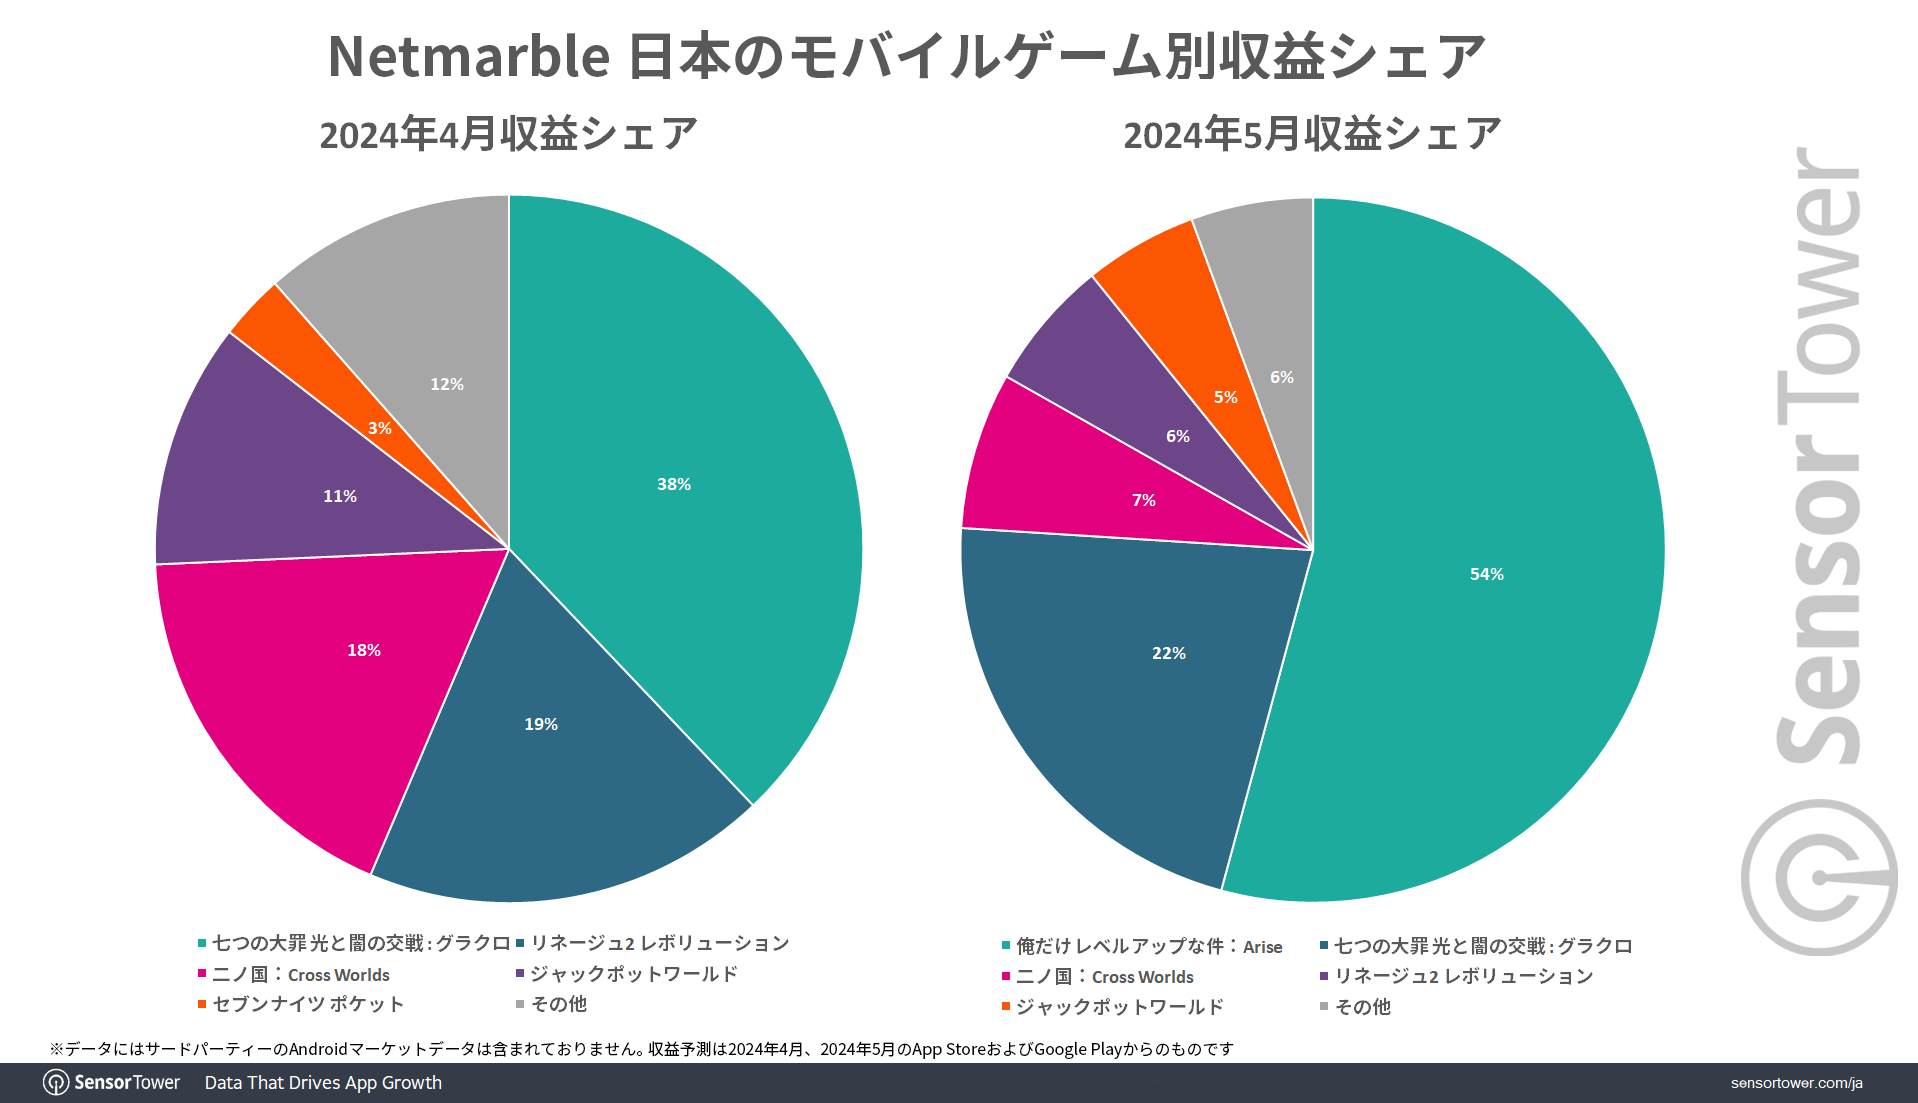 Revenue-Share-by-game-in-Japan Netmarble